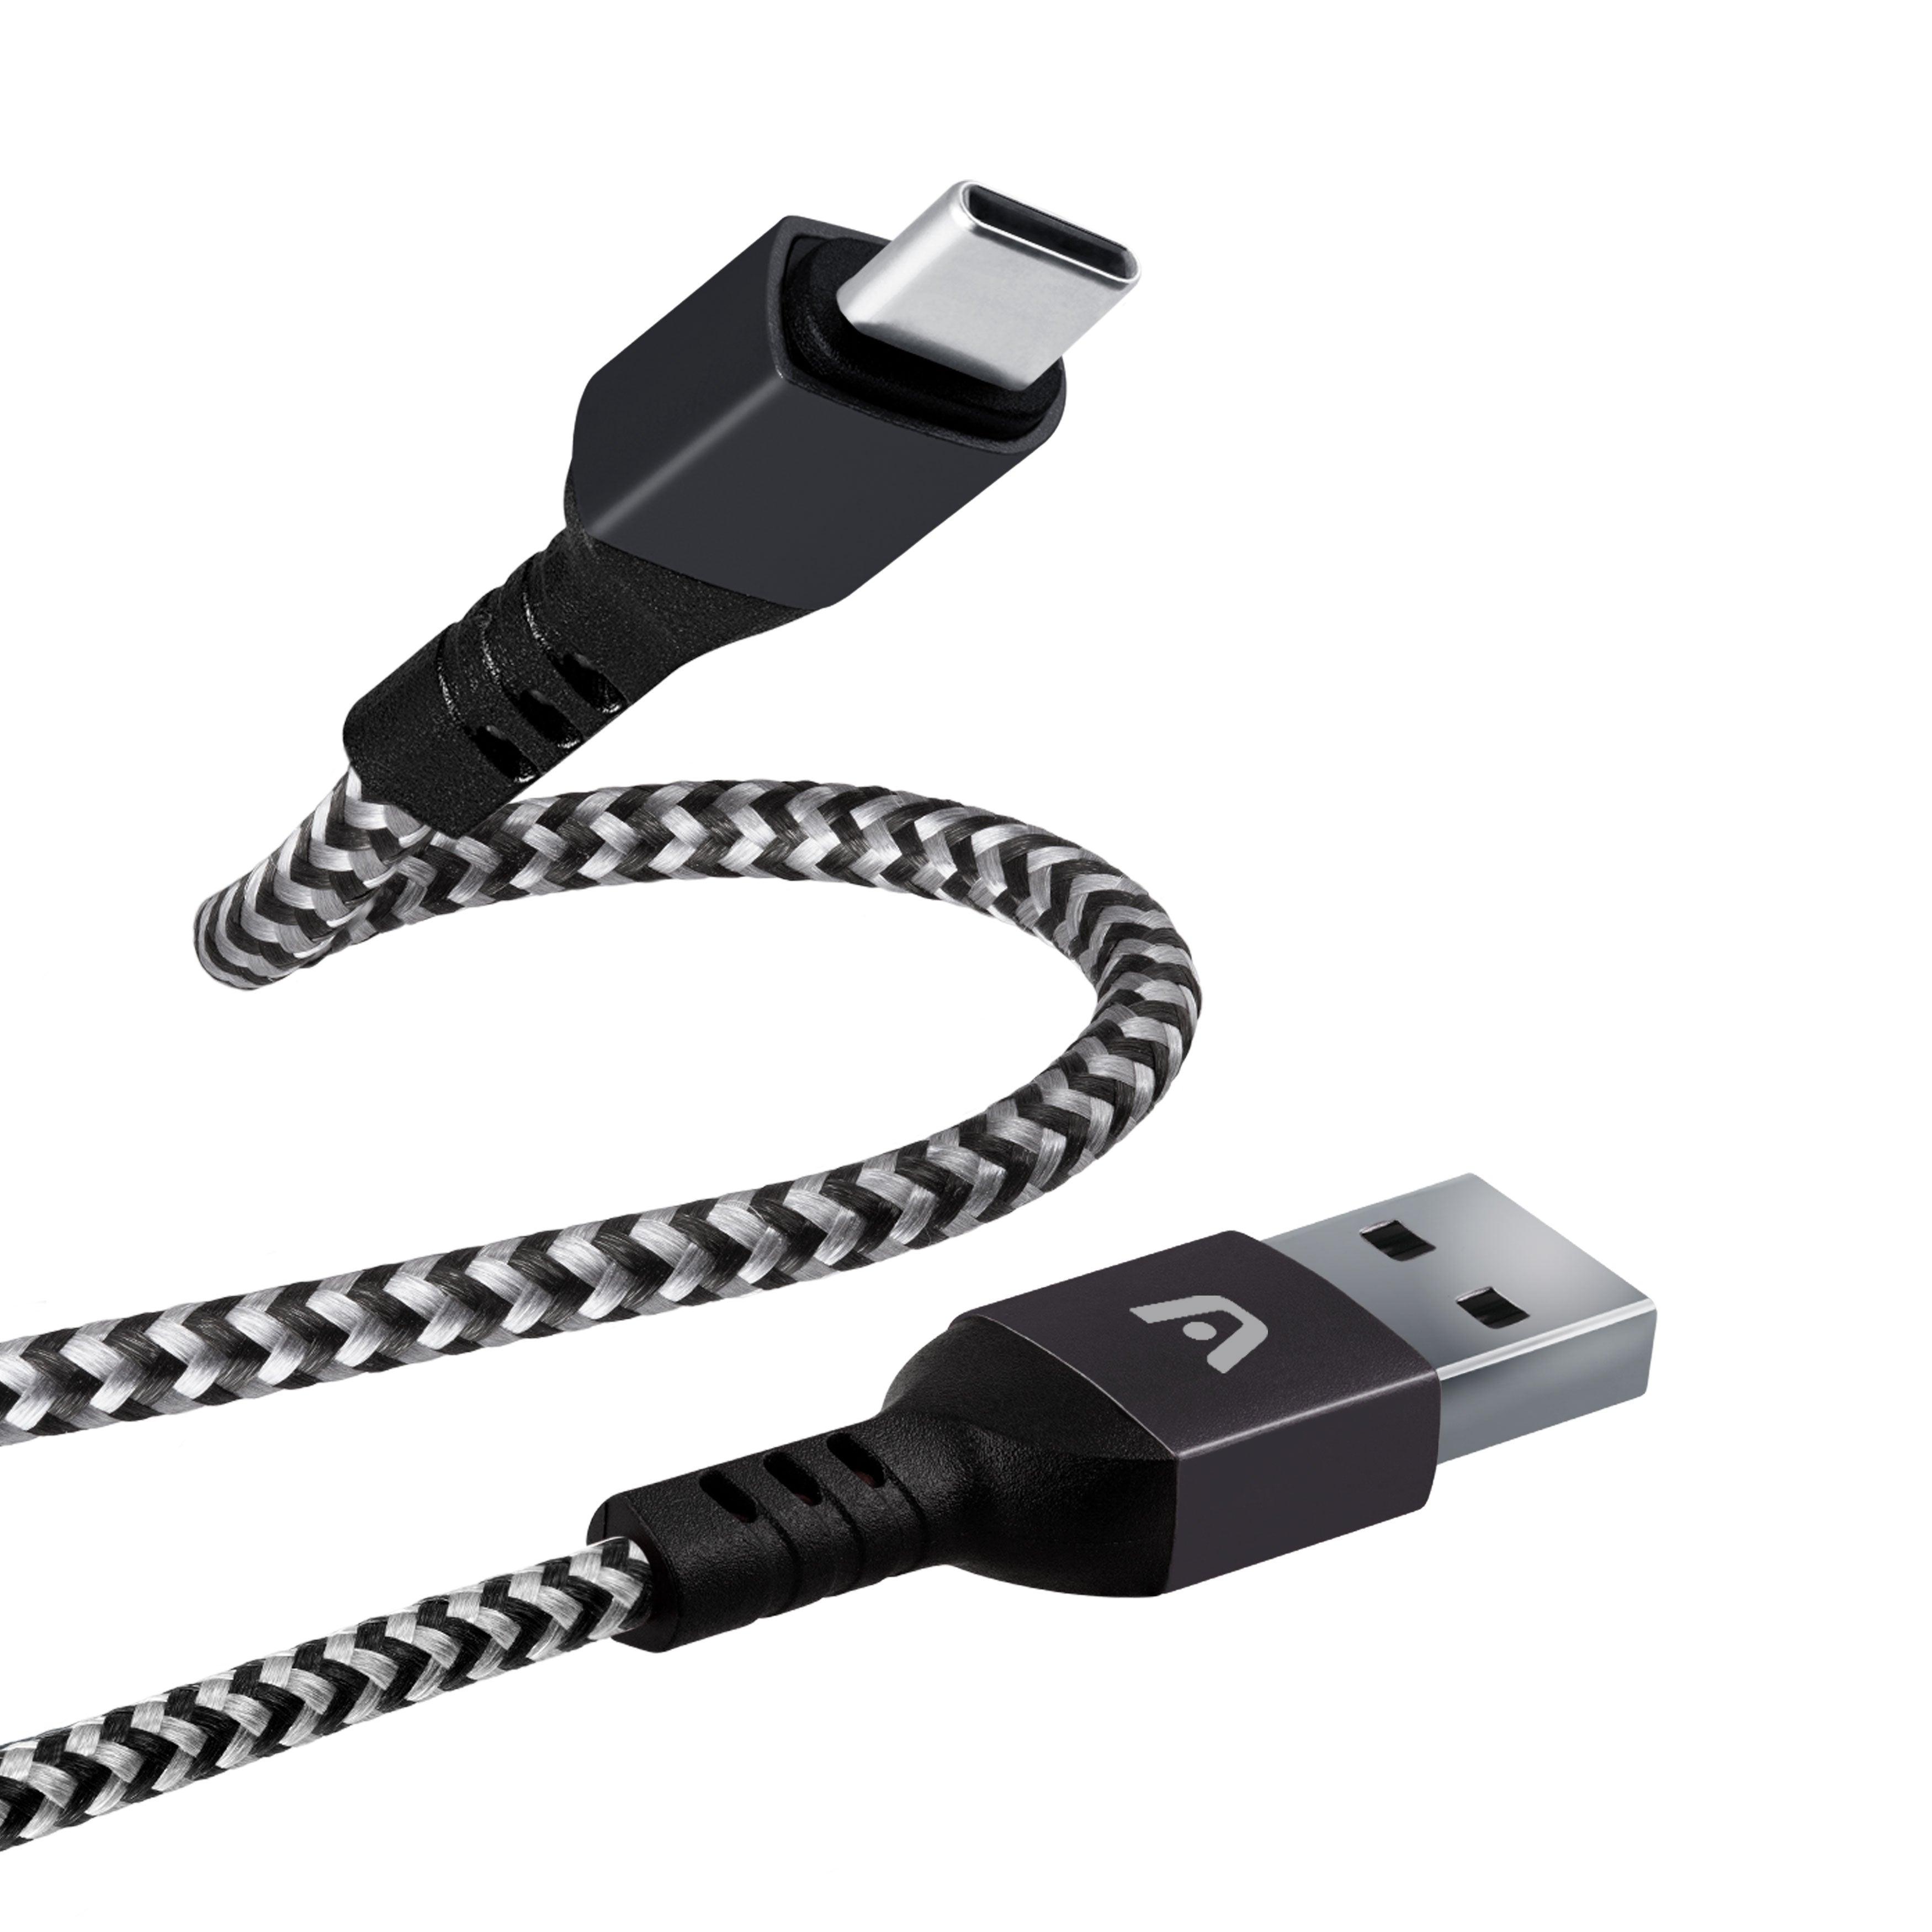 Cable USB a USB Tipo C